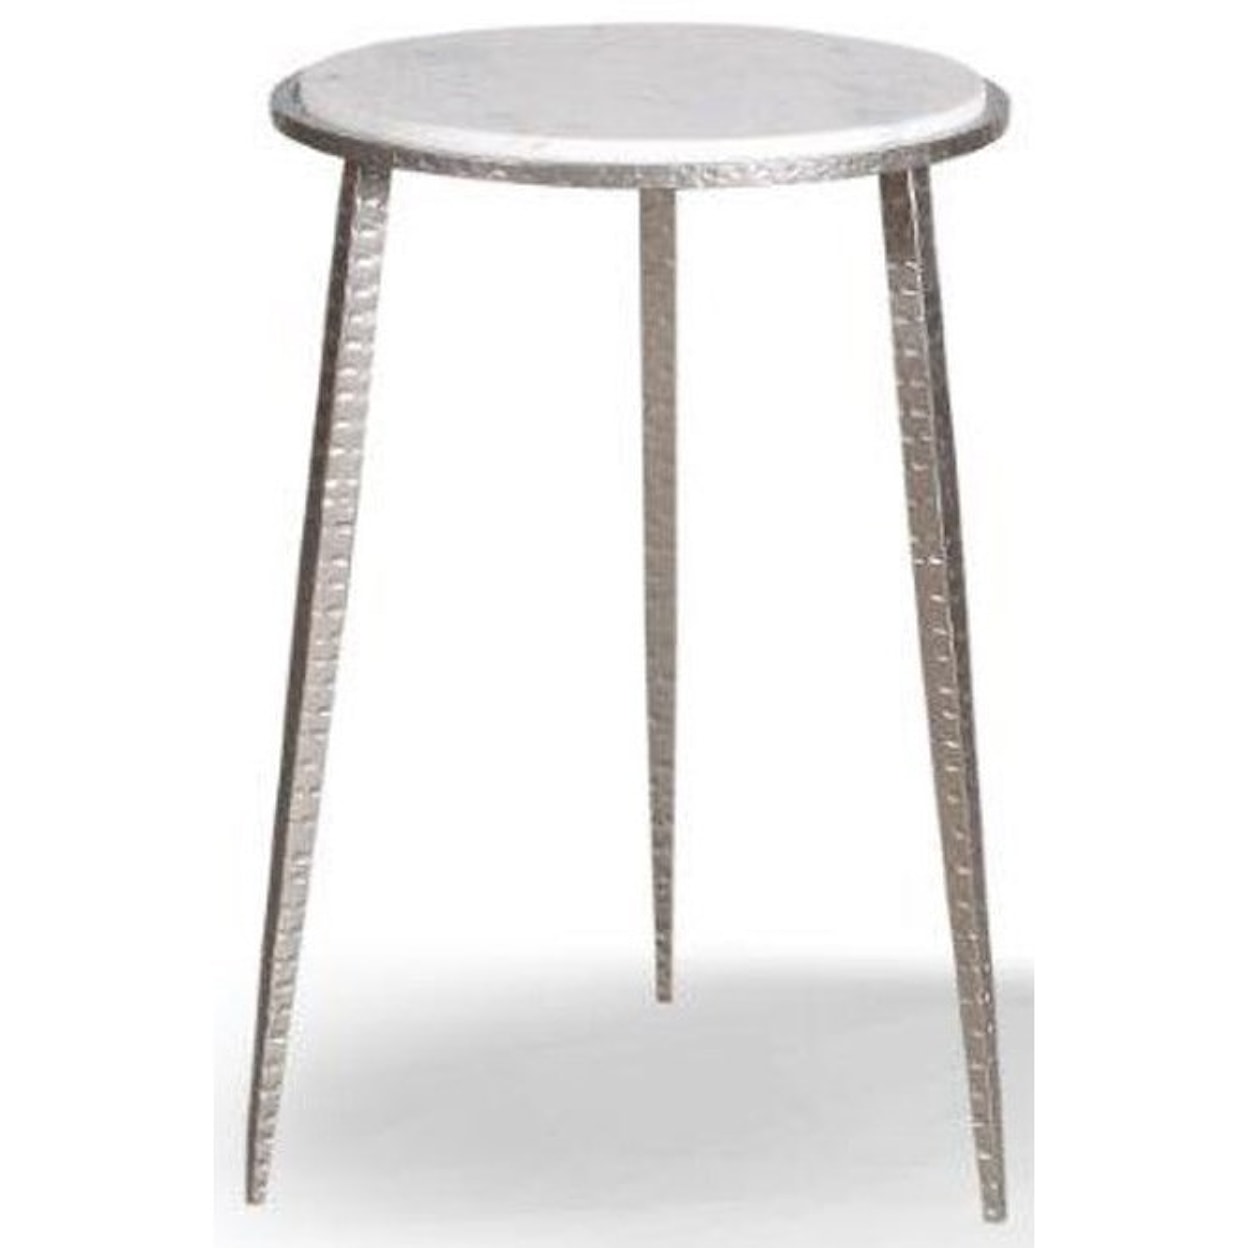 Paramount Furniture Crossings Palace Accent Table